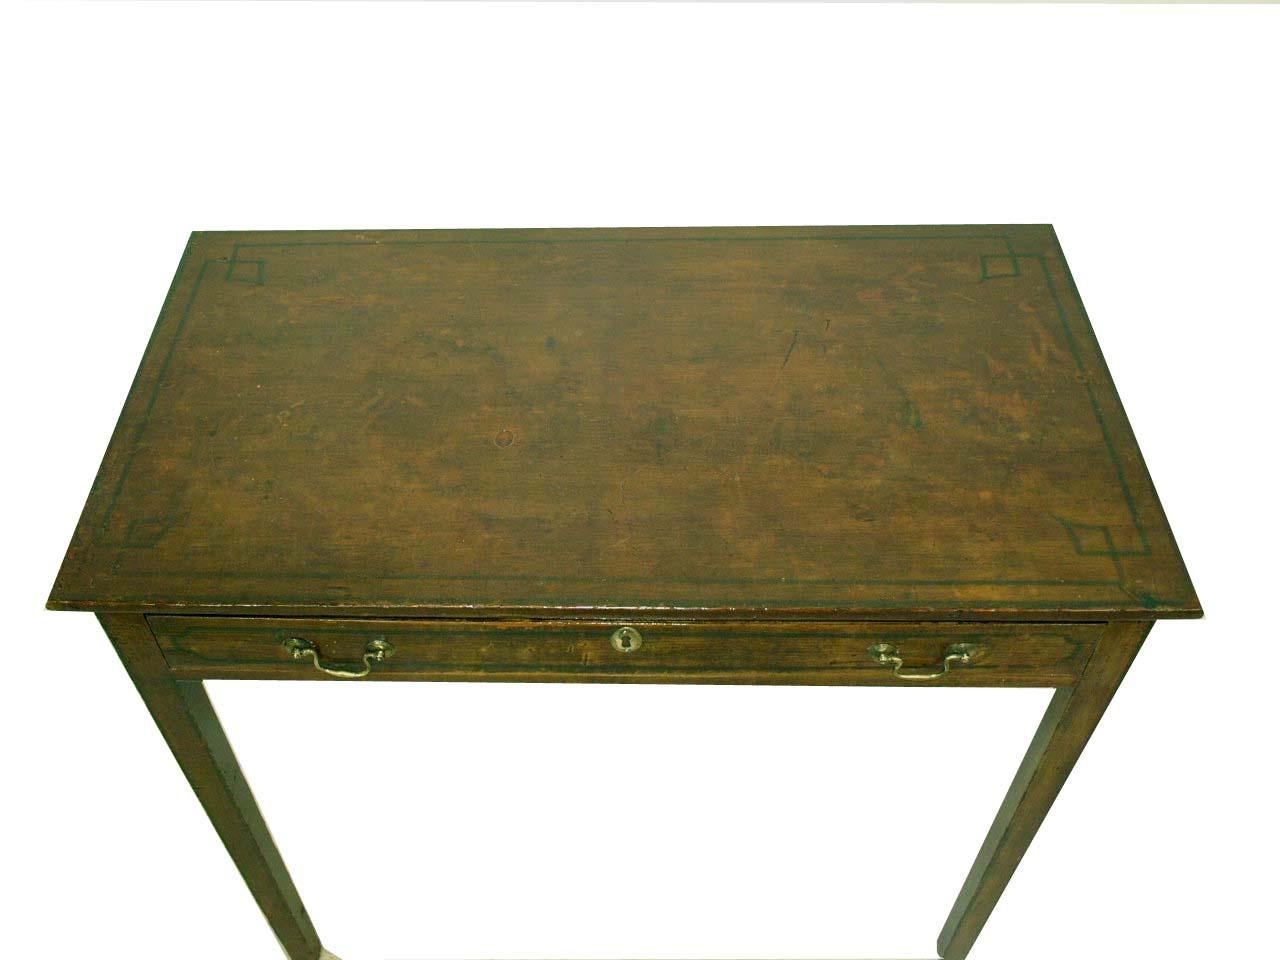 Painted English one drawer table with simulated inlay design on the top and drawer. Nice weathered patina.